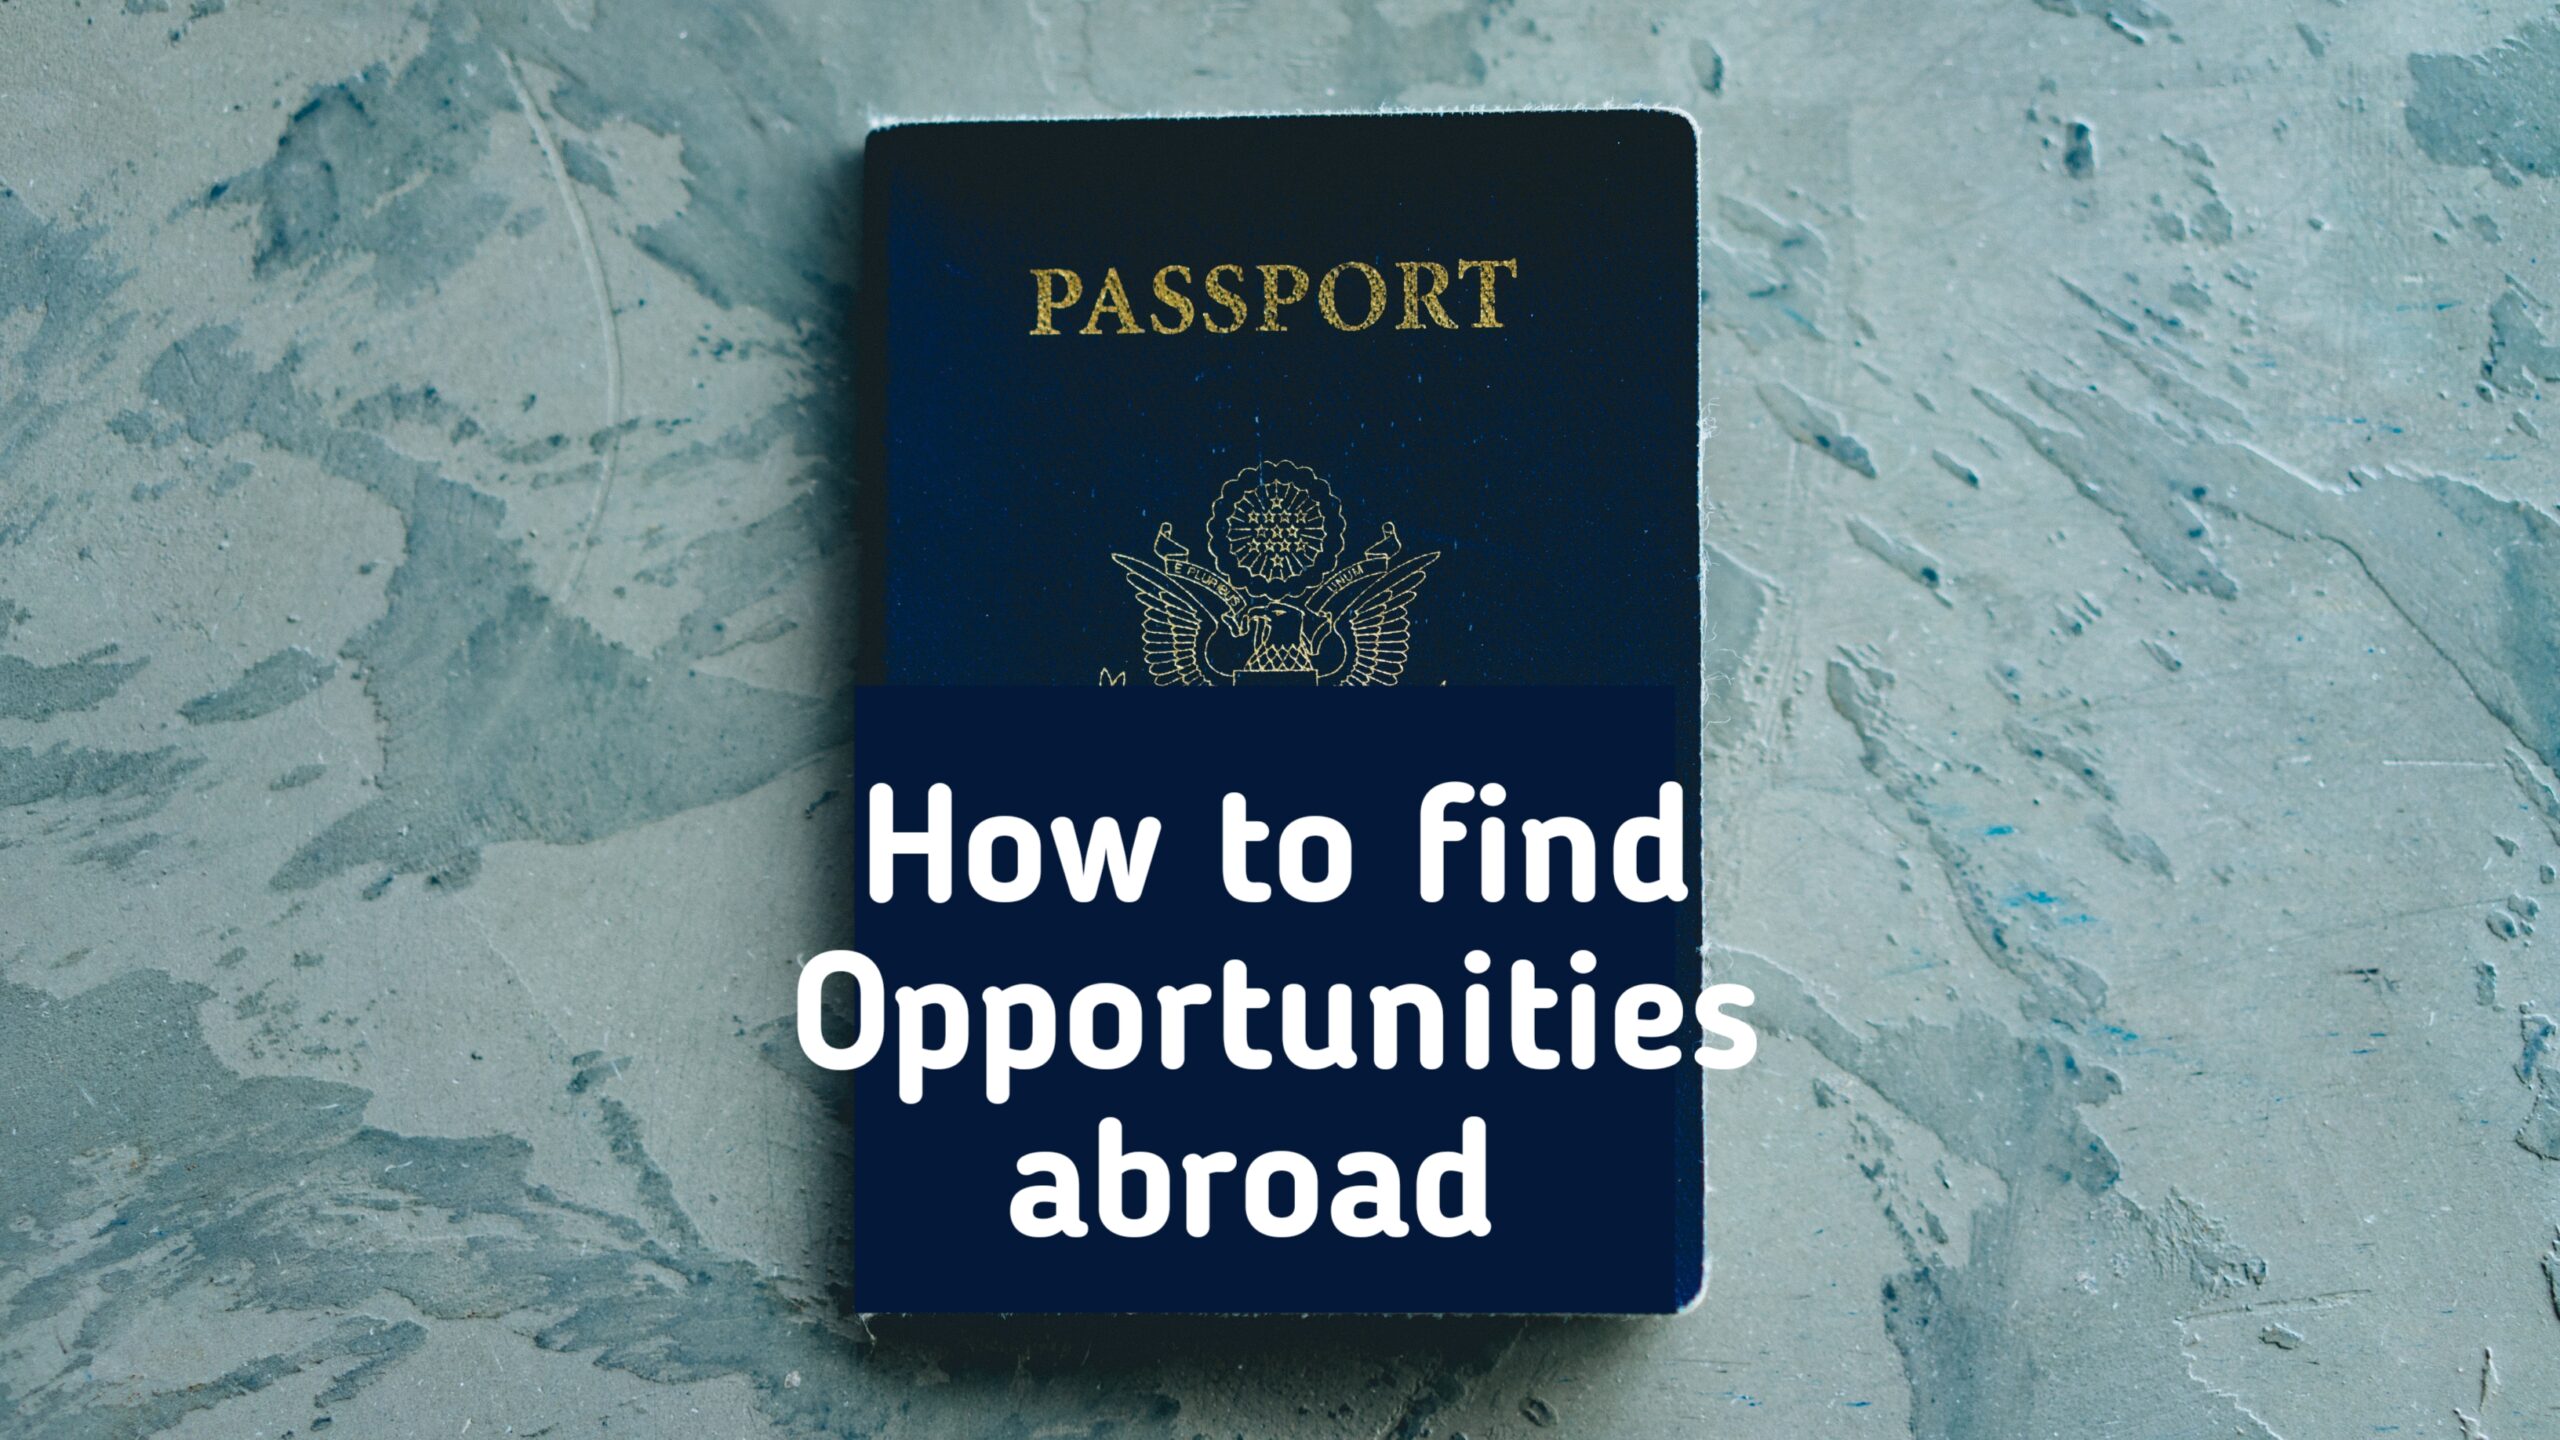 This article contains the complete guides on how you can find Opportunities Abroad, send applications and relocate to the country of your choice